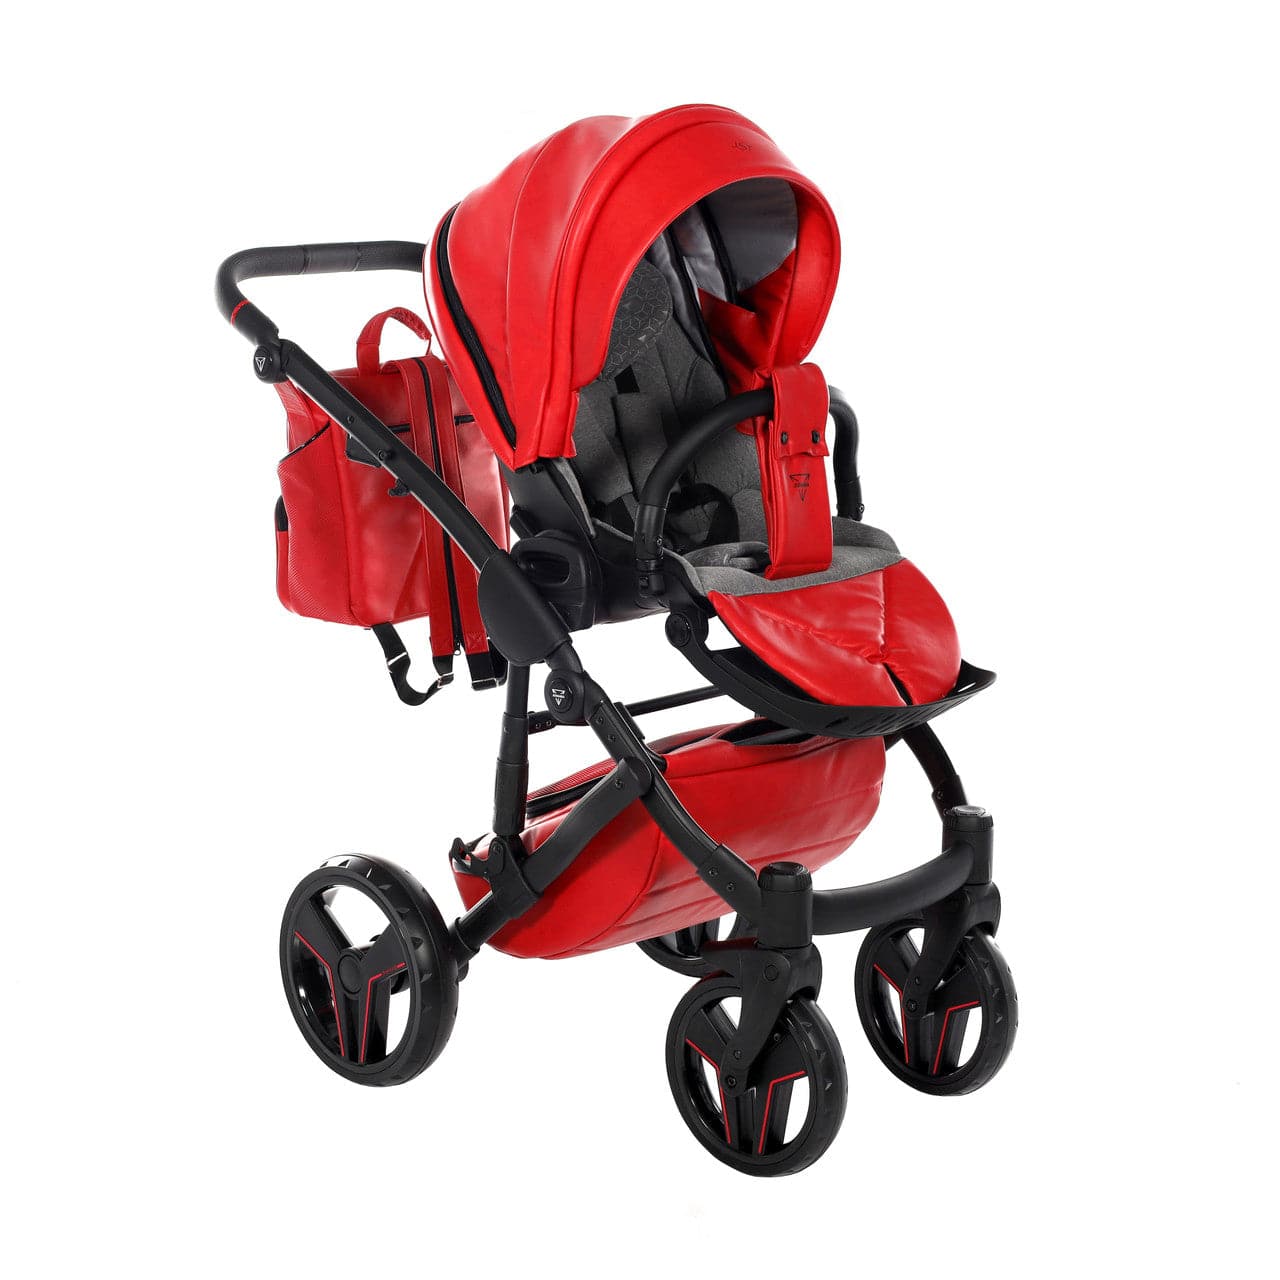 Junama S-Class 2 In 1 Pram - Red - For Your Little One